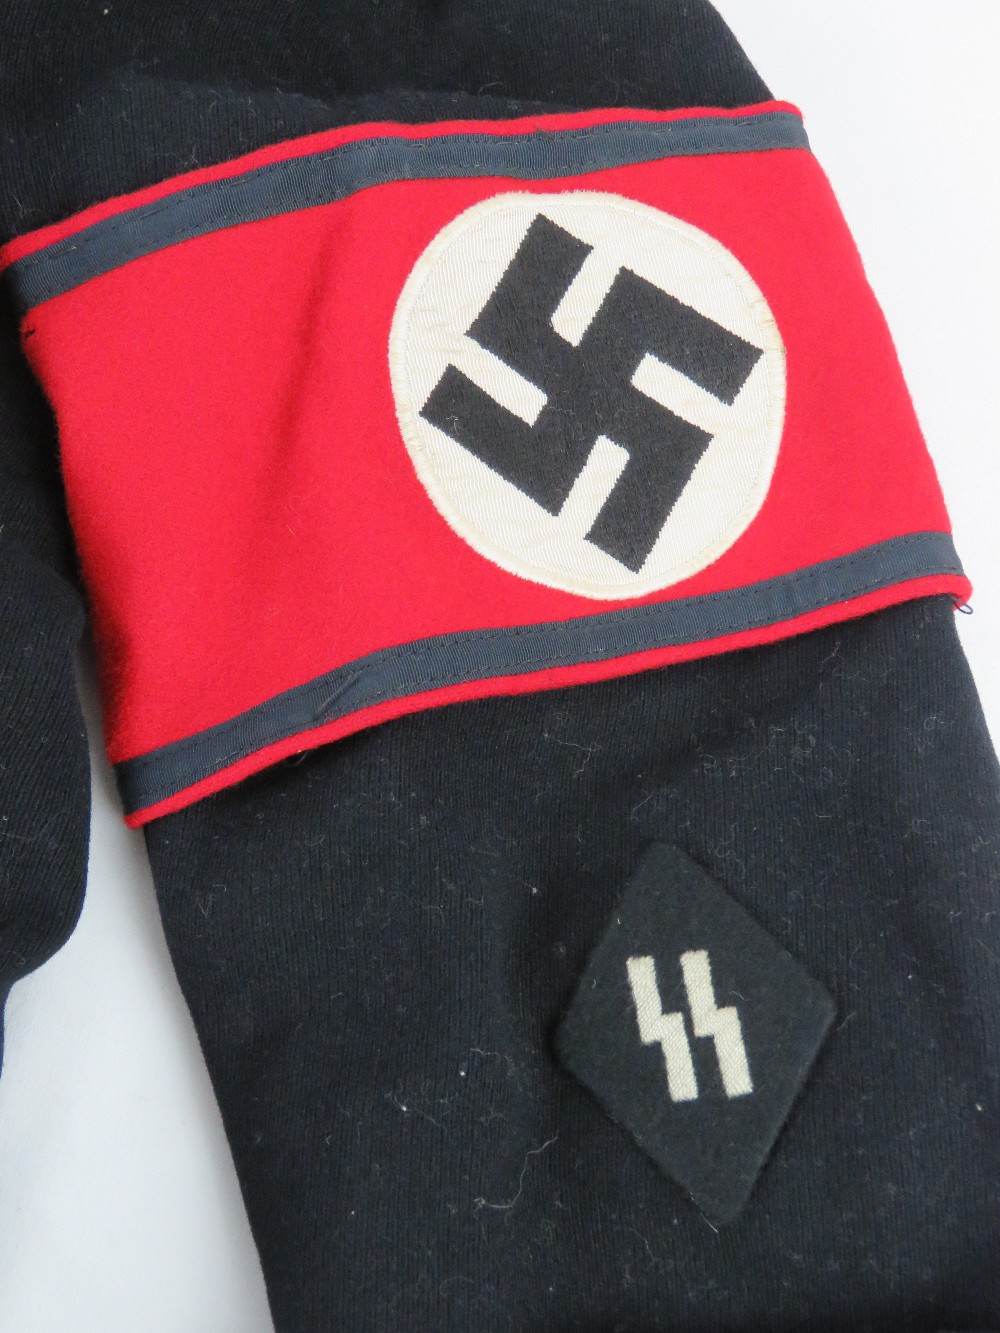 A re-enactor's SS German WWII tunic with insignia, - Image 8 of 8